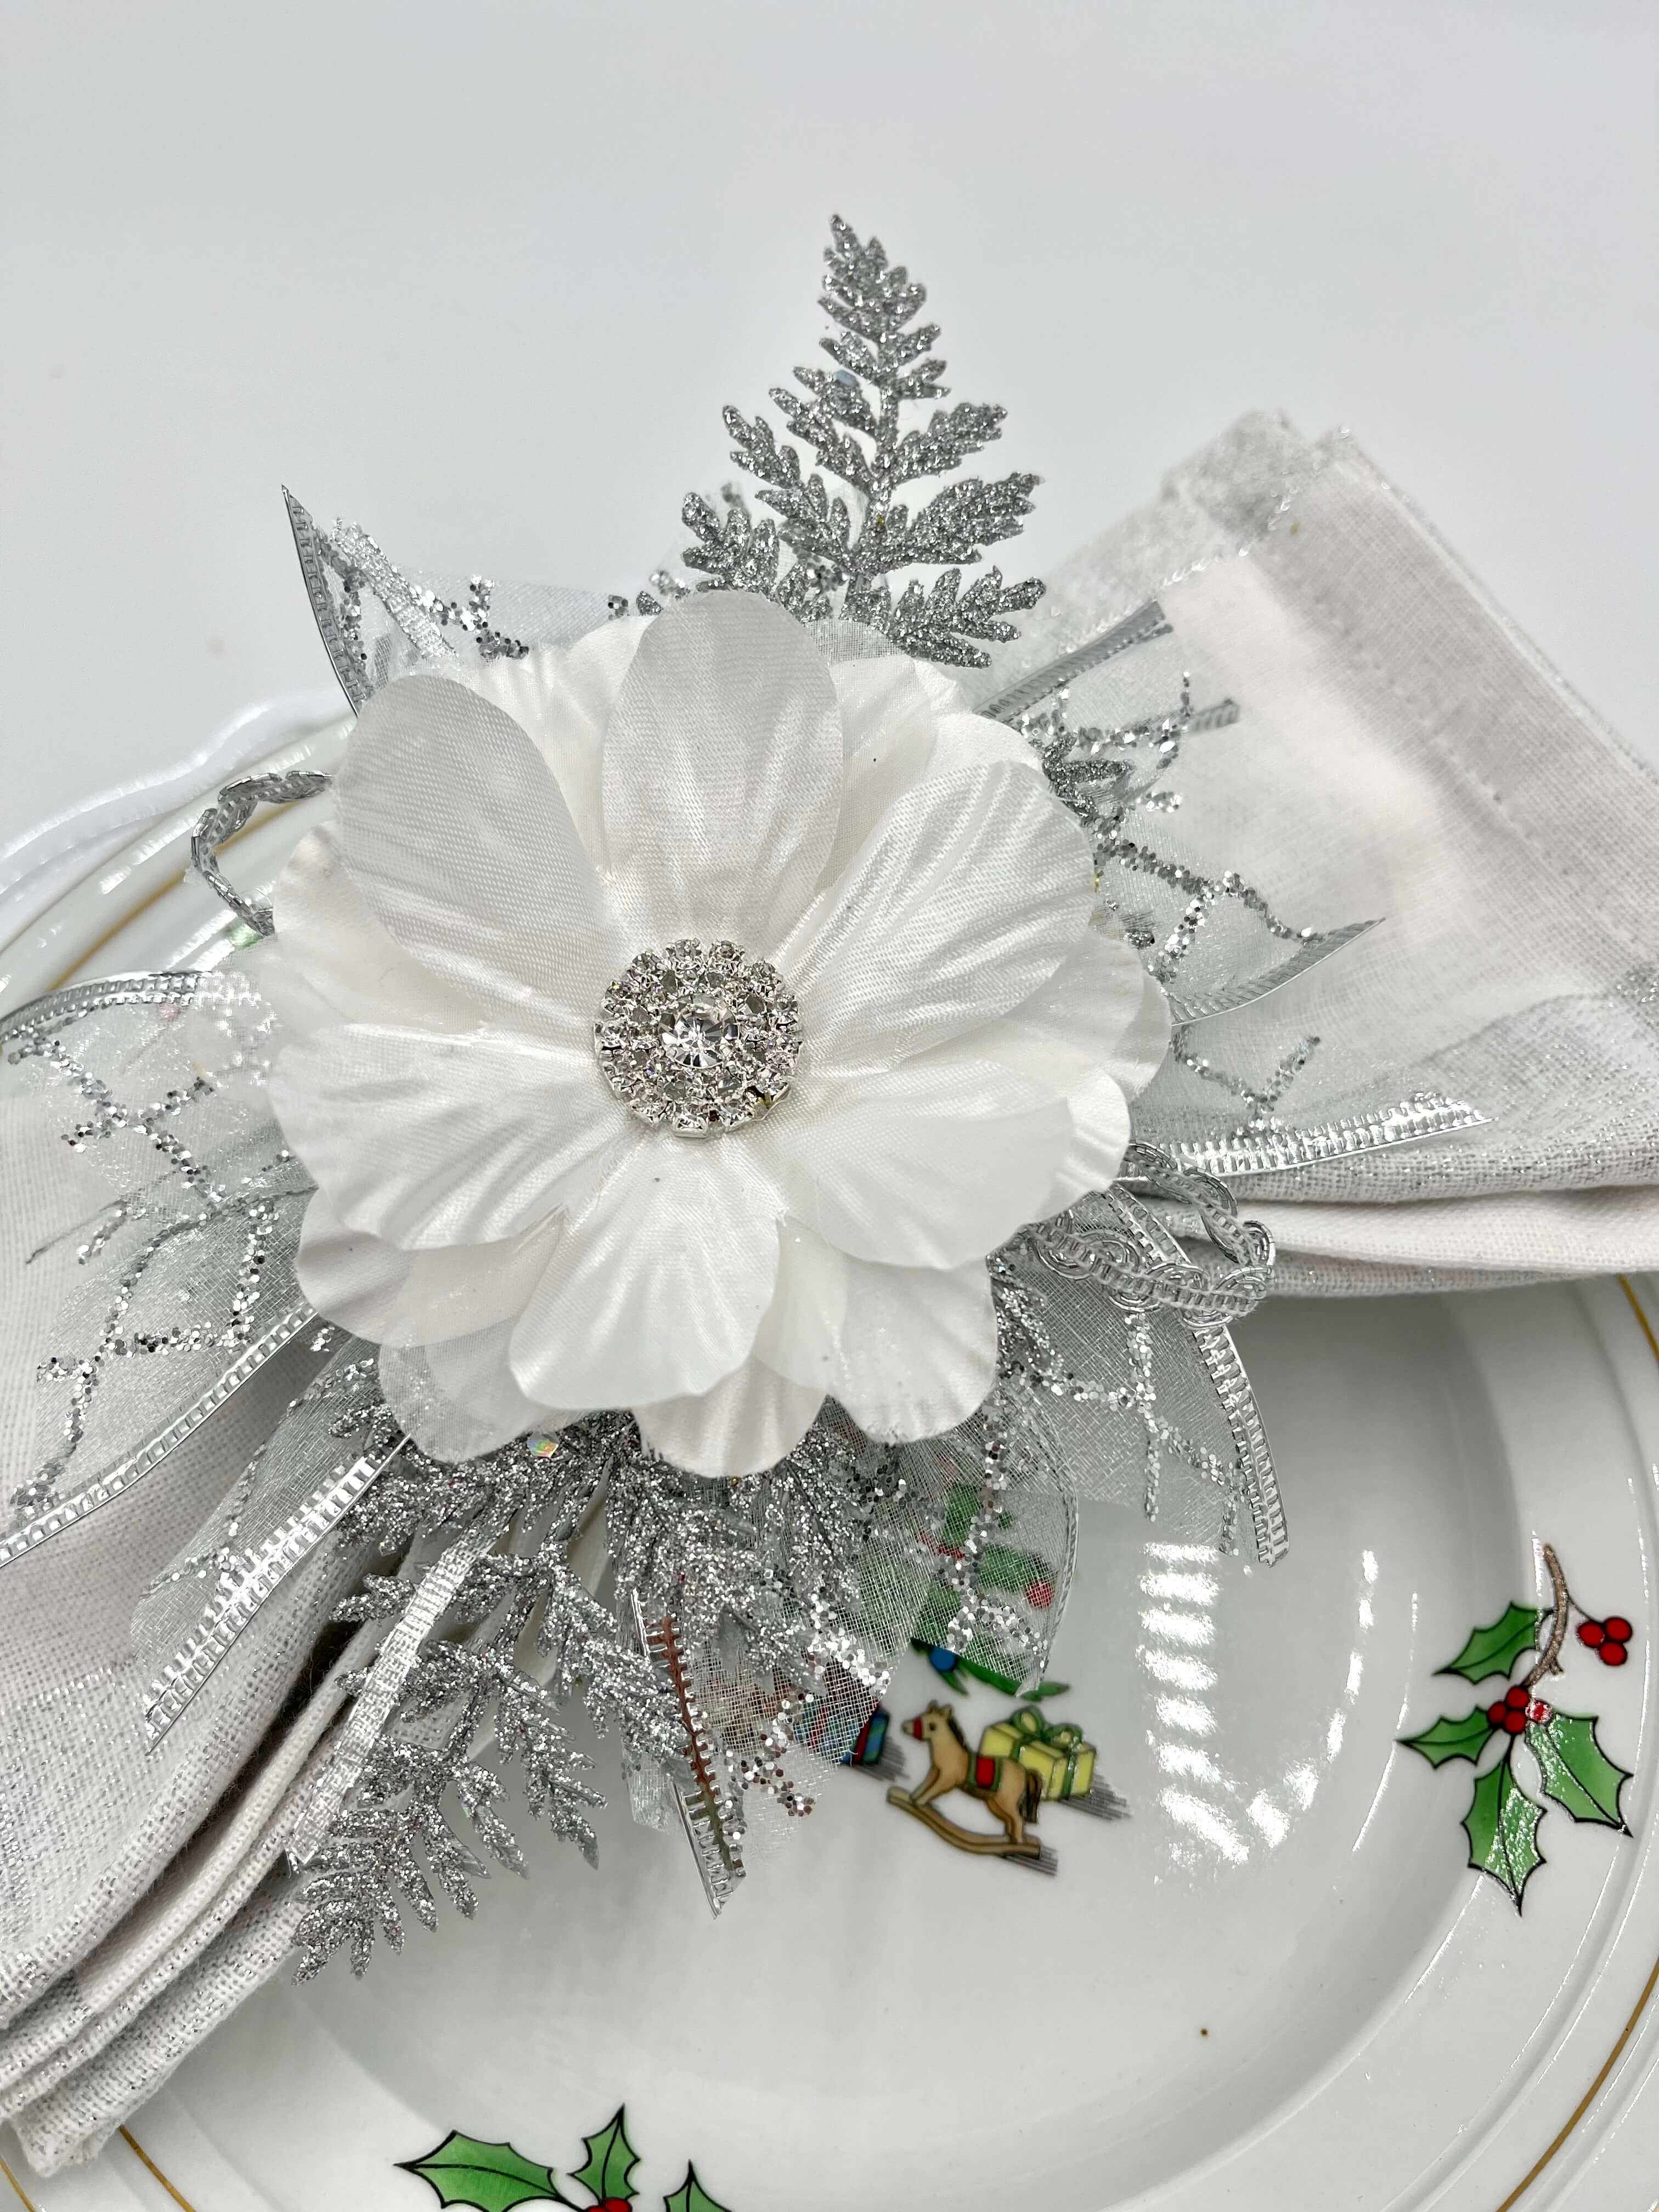 Napkin Ring Holidays And Christmas Home Decor; White And Silver Decor. Perfect Holidays Gift Idea For Friend, Mother, Teacher. Elegant Decor